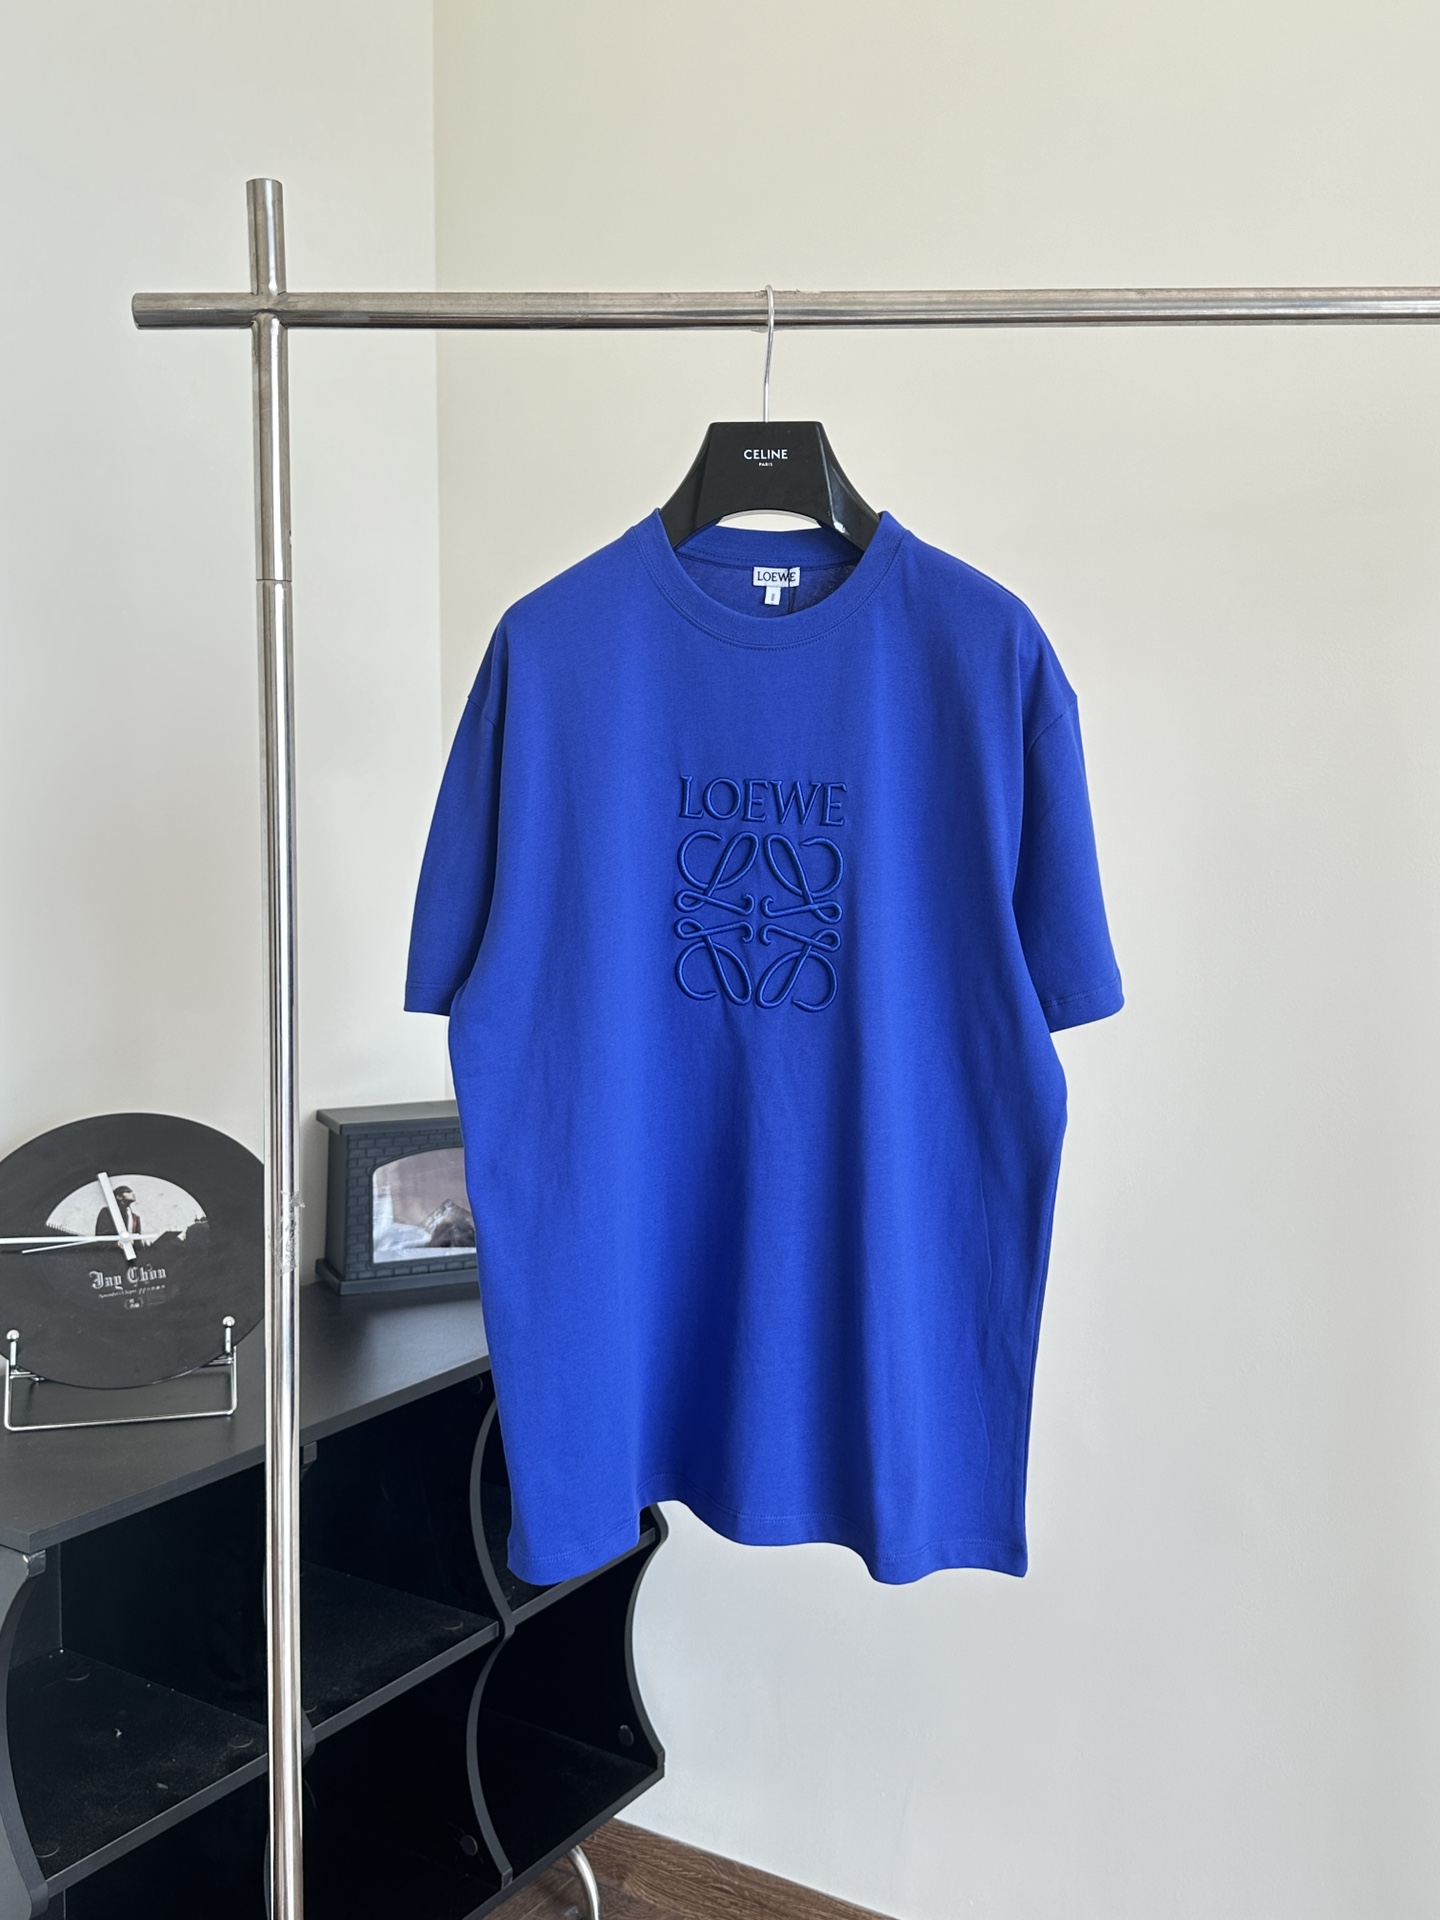 Top Quality Website
 Loewe Clothing T-Shirt Perfect Replica
 Embroidery Unisex Cotton Knitting Spring/Summer Collection Short Sleeve